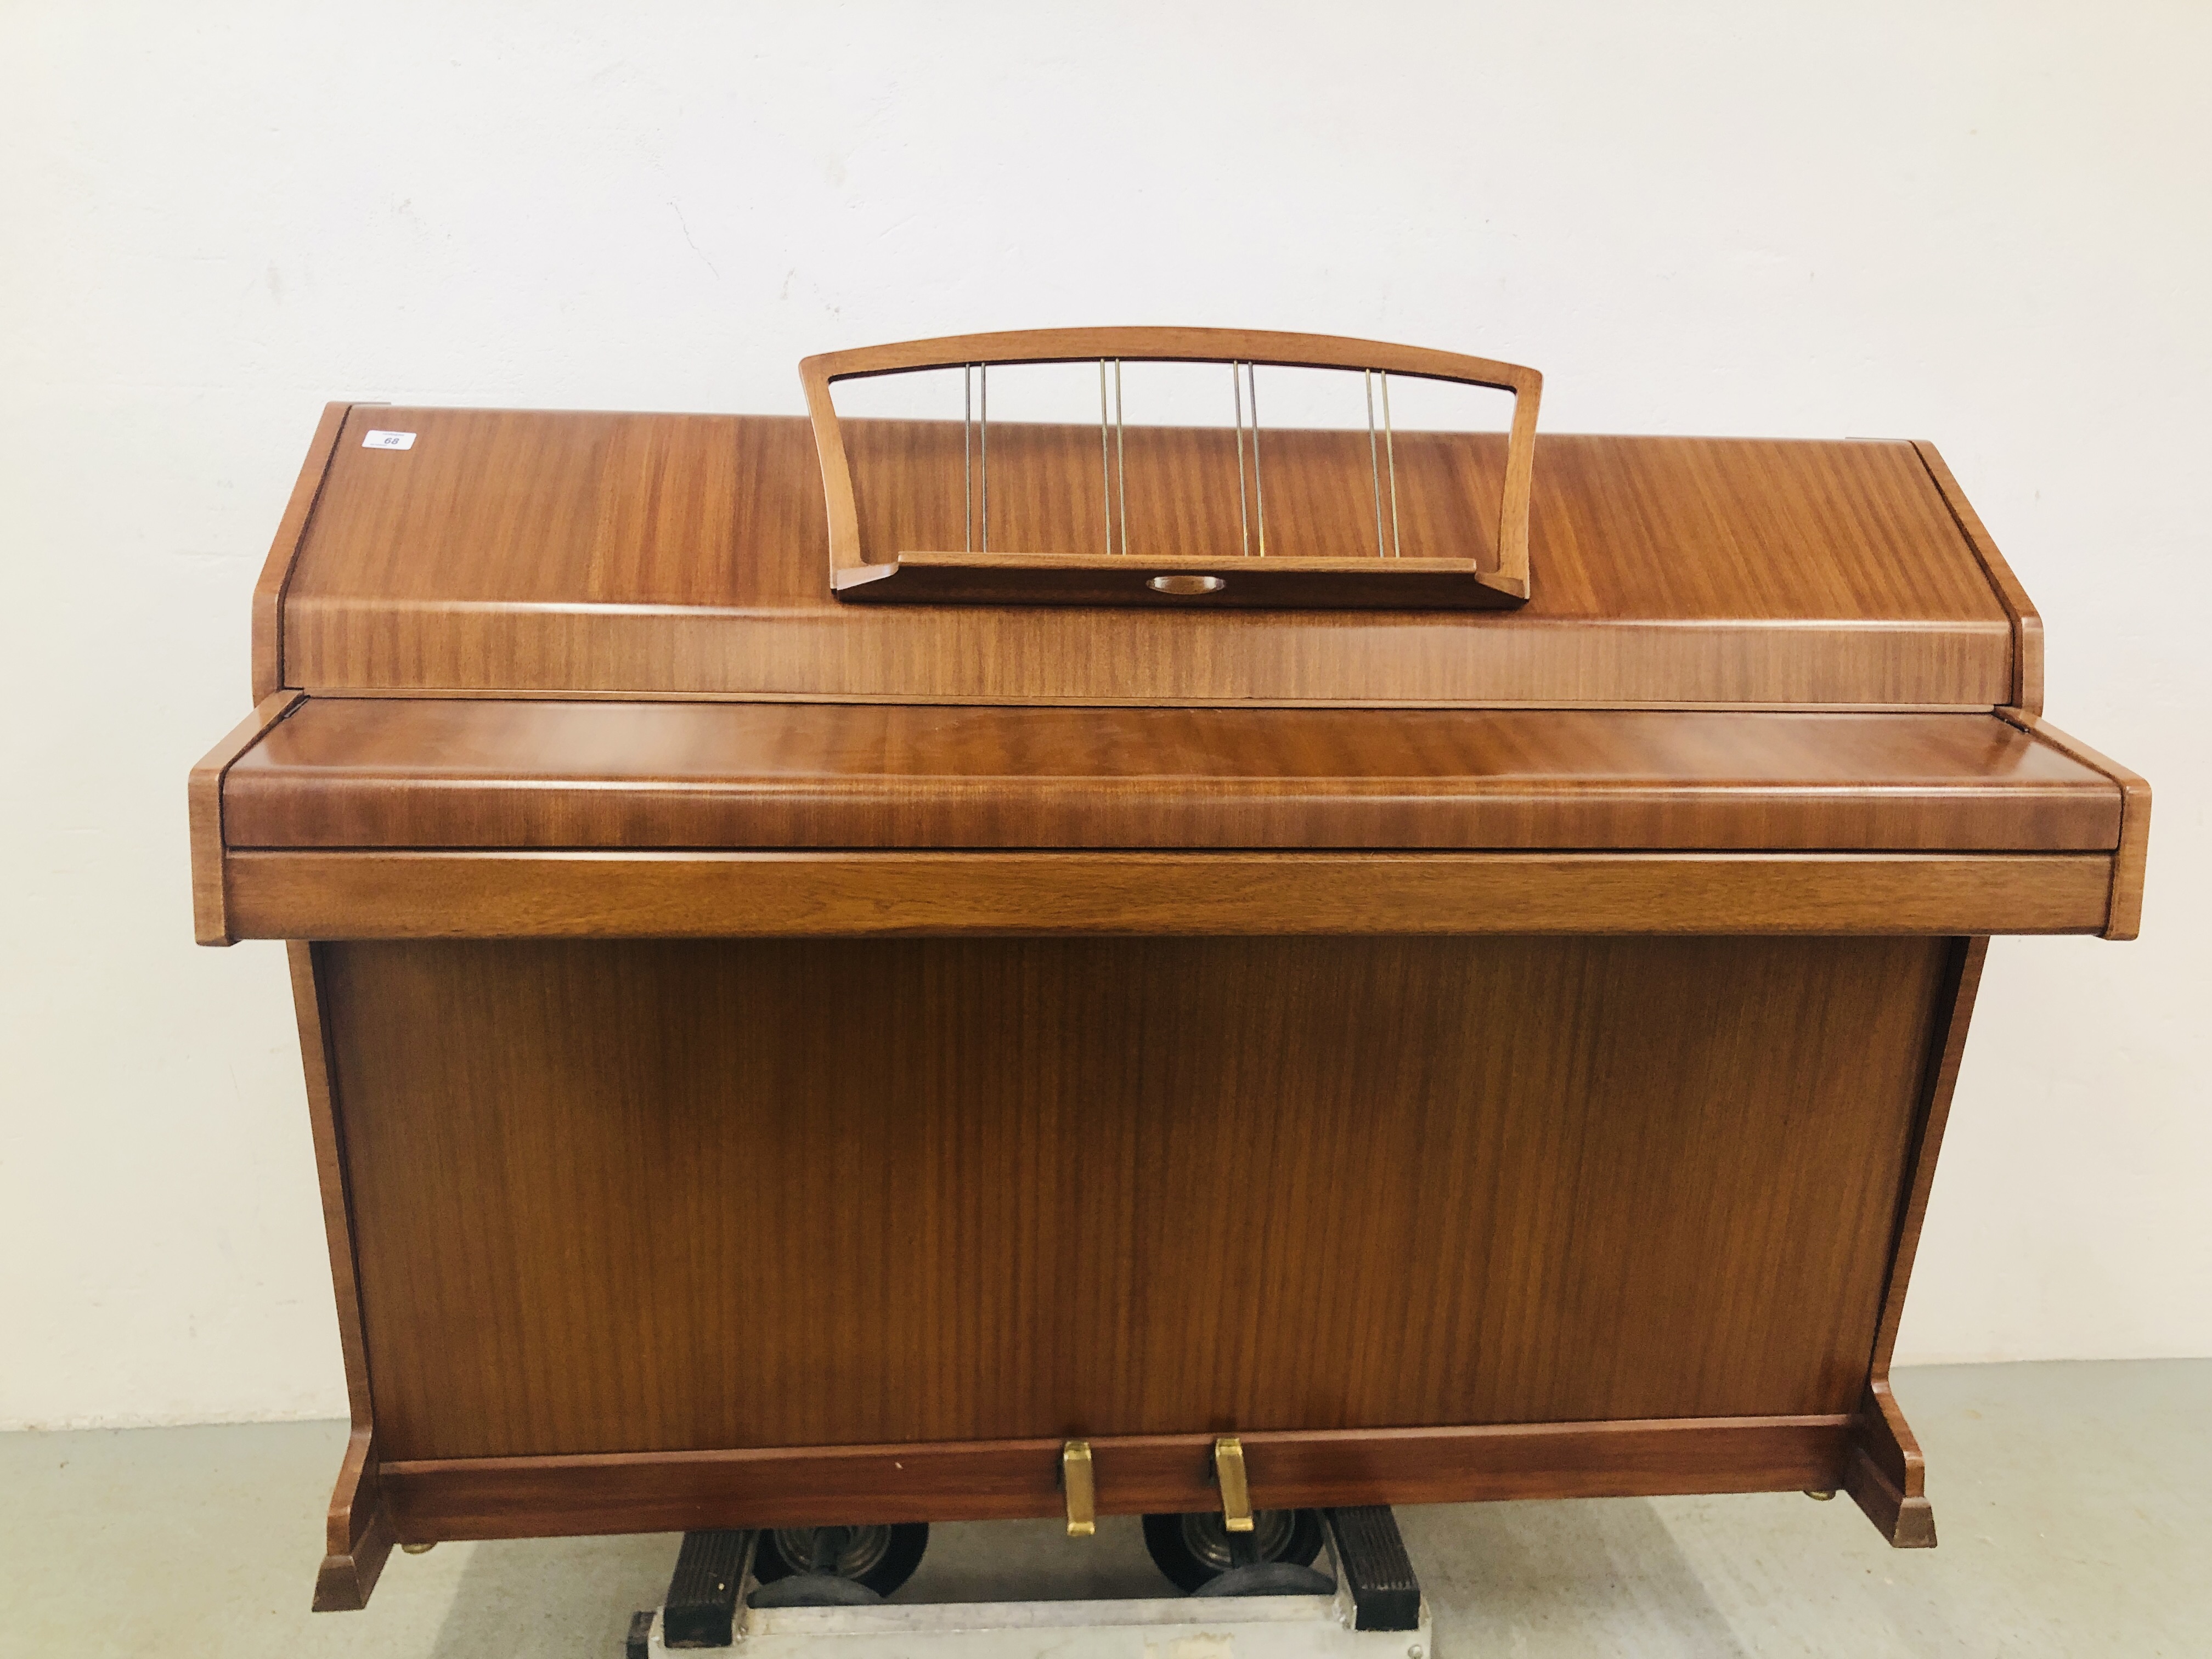 EAVESTAFF MINI PIANO "PIANETTE" UPRIGHT OVERSTRUNG PIANO AND MUSIC STOOL - Image 8 of 27